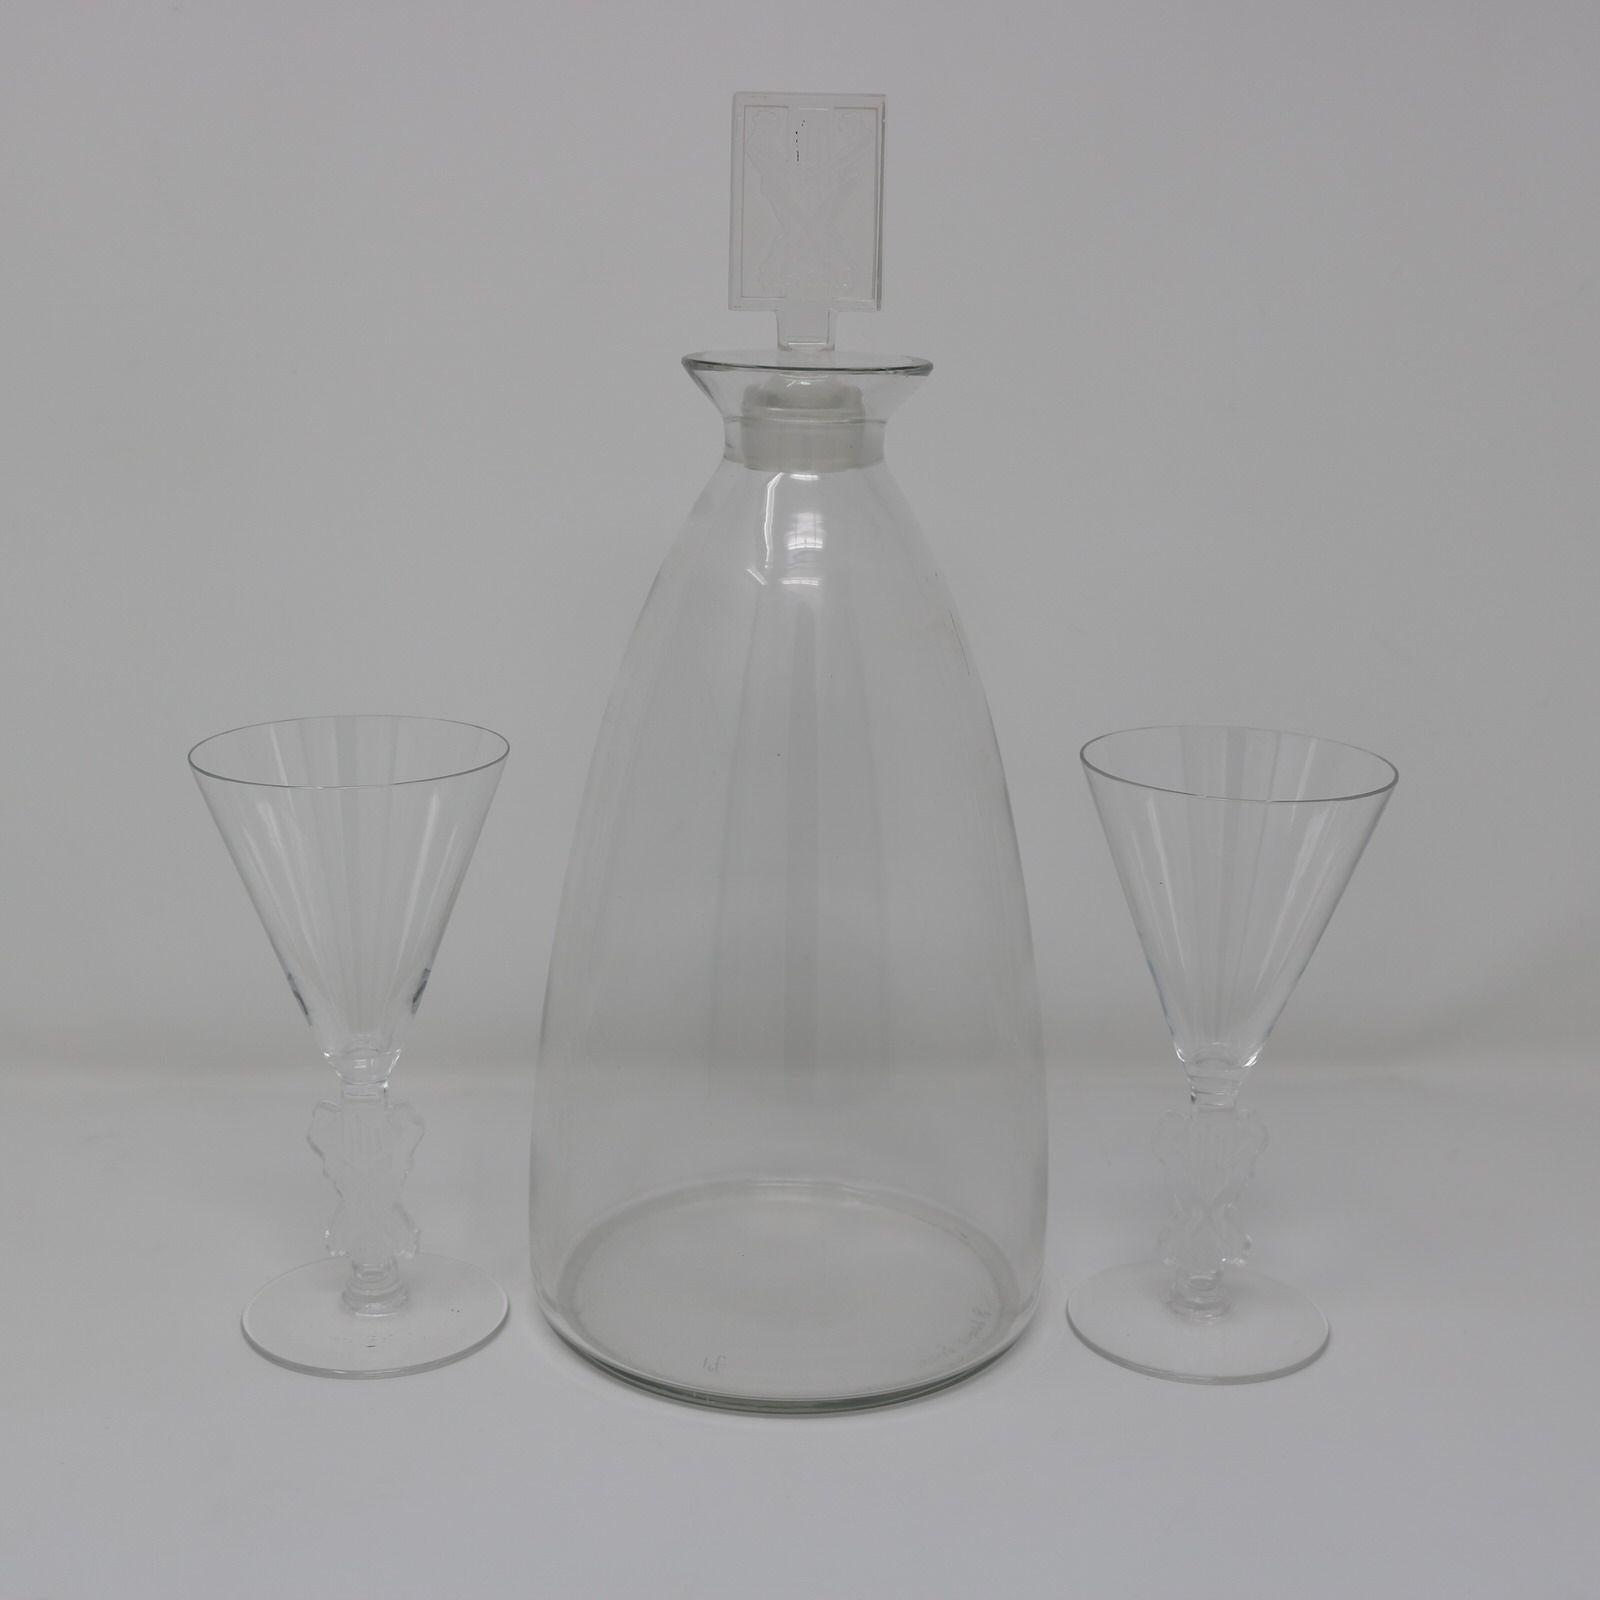 Rene Lalique Glass 'Strasbourg' Decanter with two matching glasses. The rectangular shaped stopper features two men grape stomping. The stems of the glasses feature the same motif. Makers mark, 'R Lalique France' and pattern number, 'No.5082'